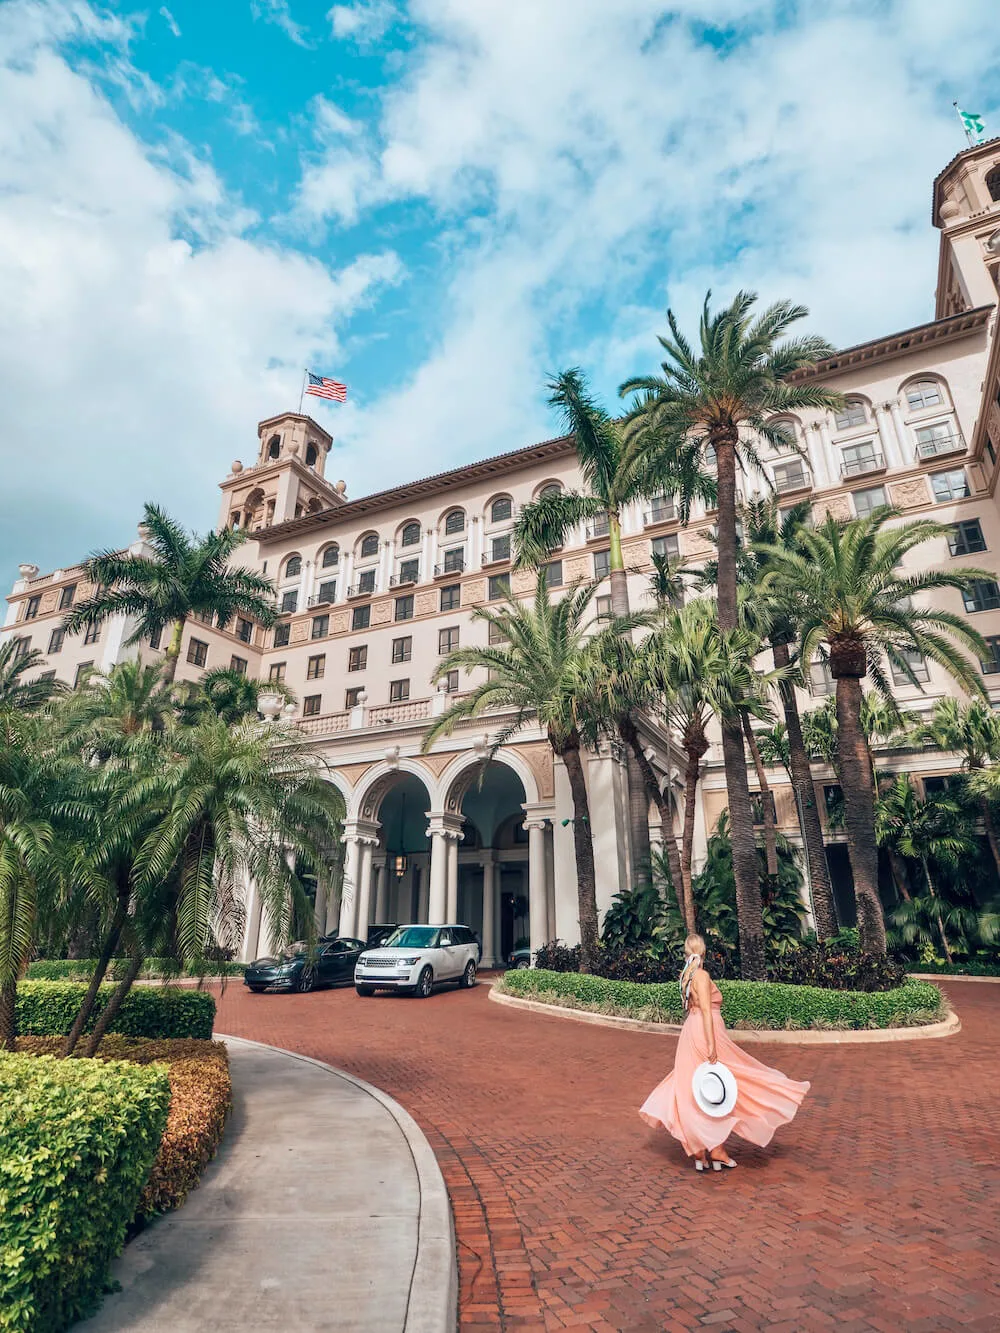 14 Top-Rated Things to Do in Palm Beach Gardens, FL